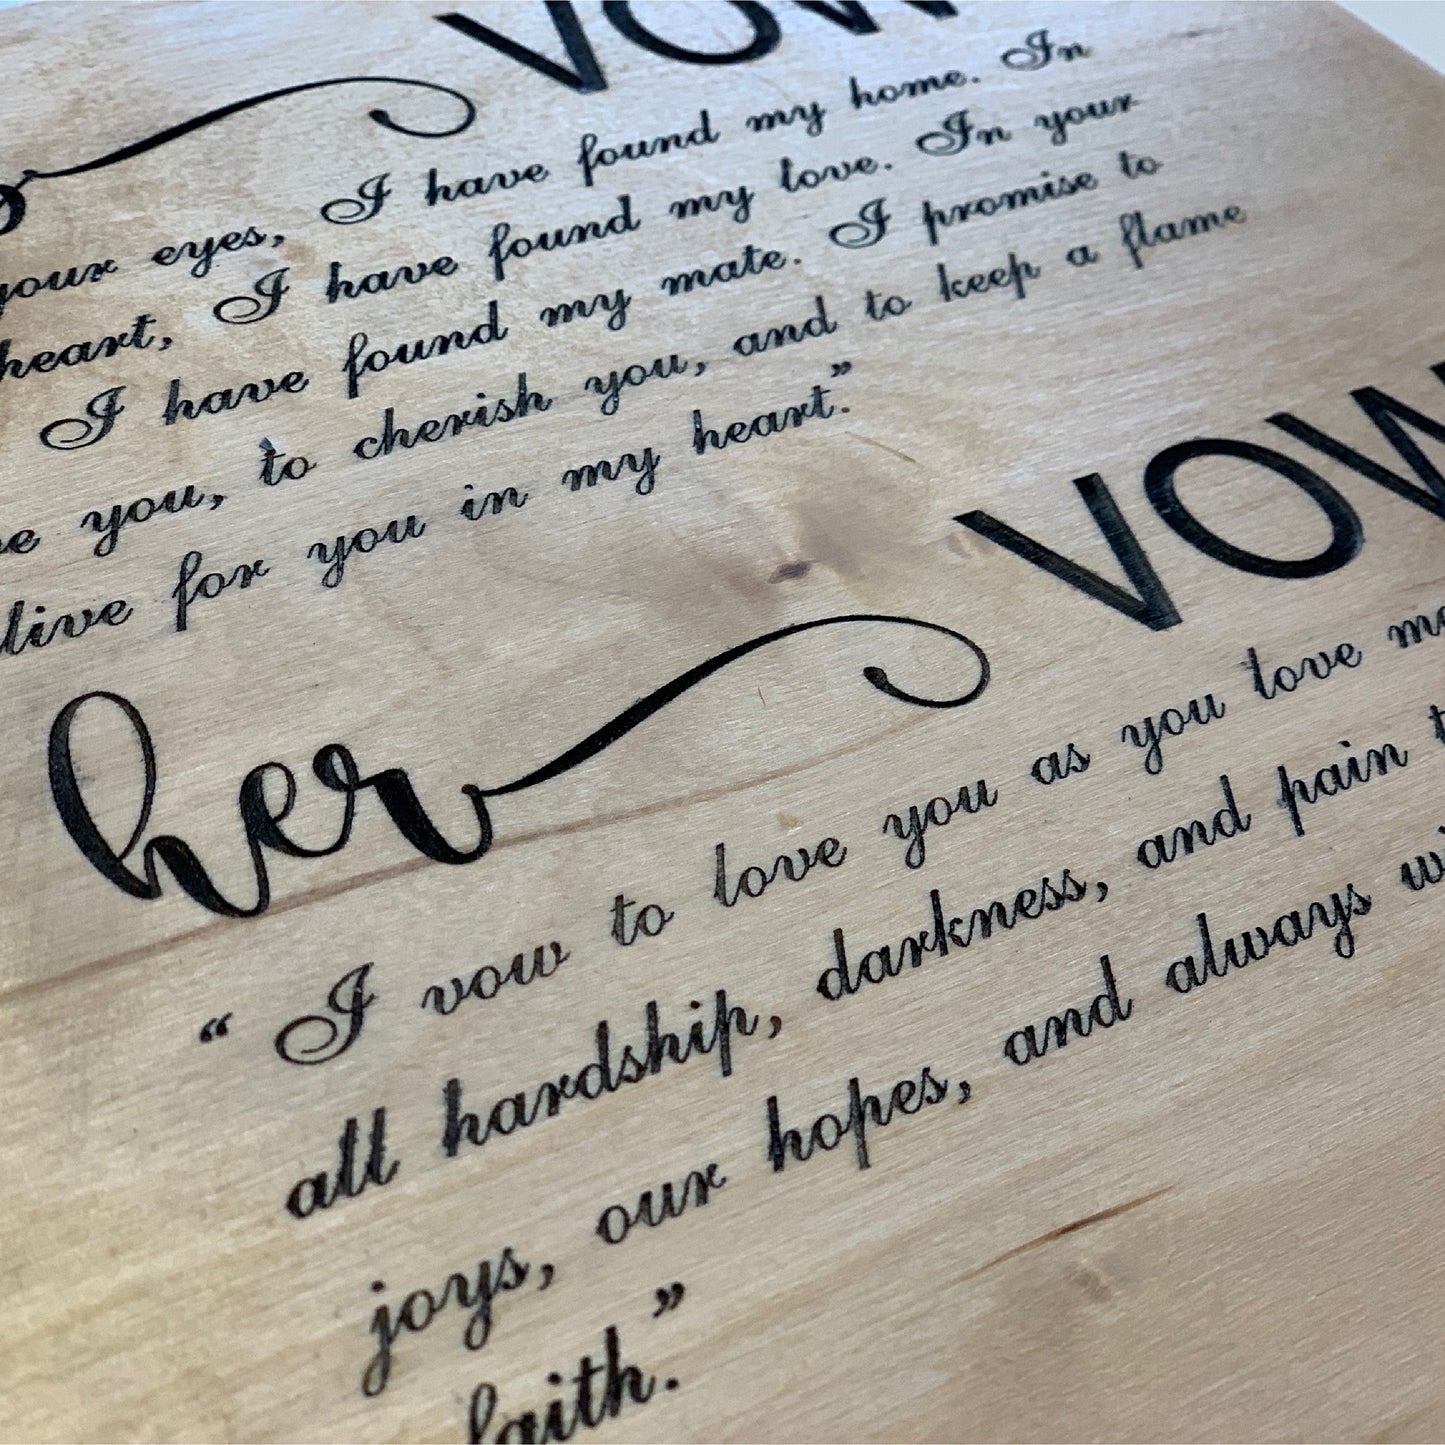 Wedding sign with cross, his vow her vow wedding sign, custom wedding table signs, custom gift, Wedding Wood Sign,wedding welcome Sign,custom wood sign, Engraved Wedding Wood Sign, cross wedding sign